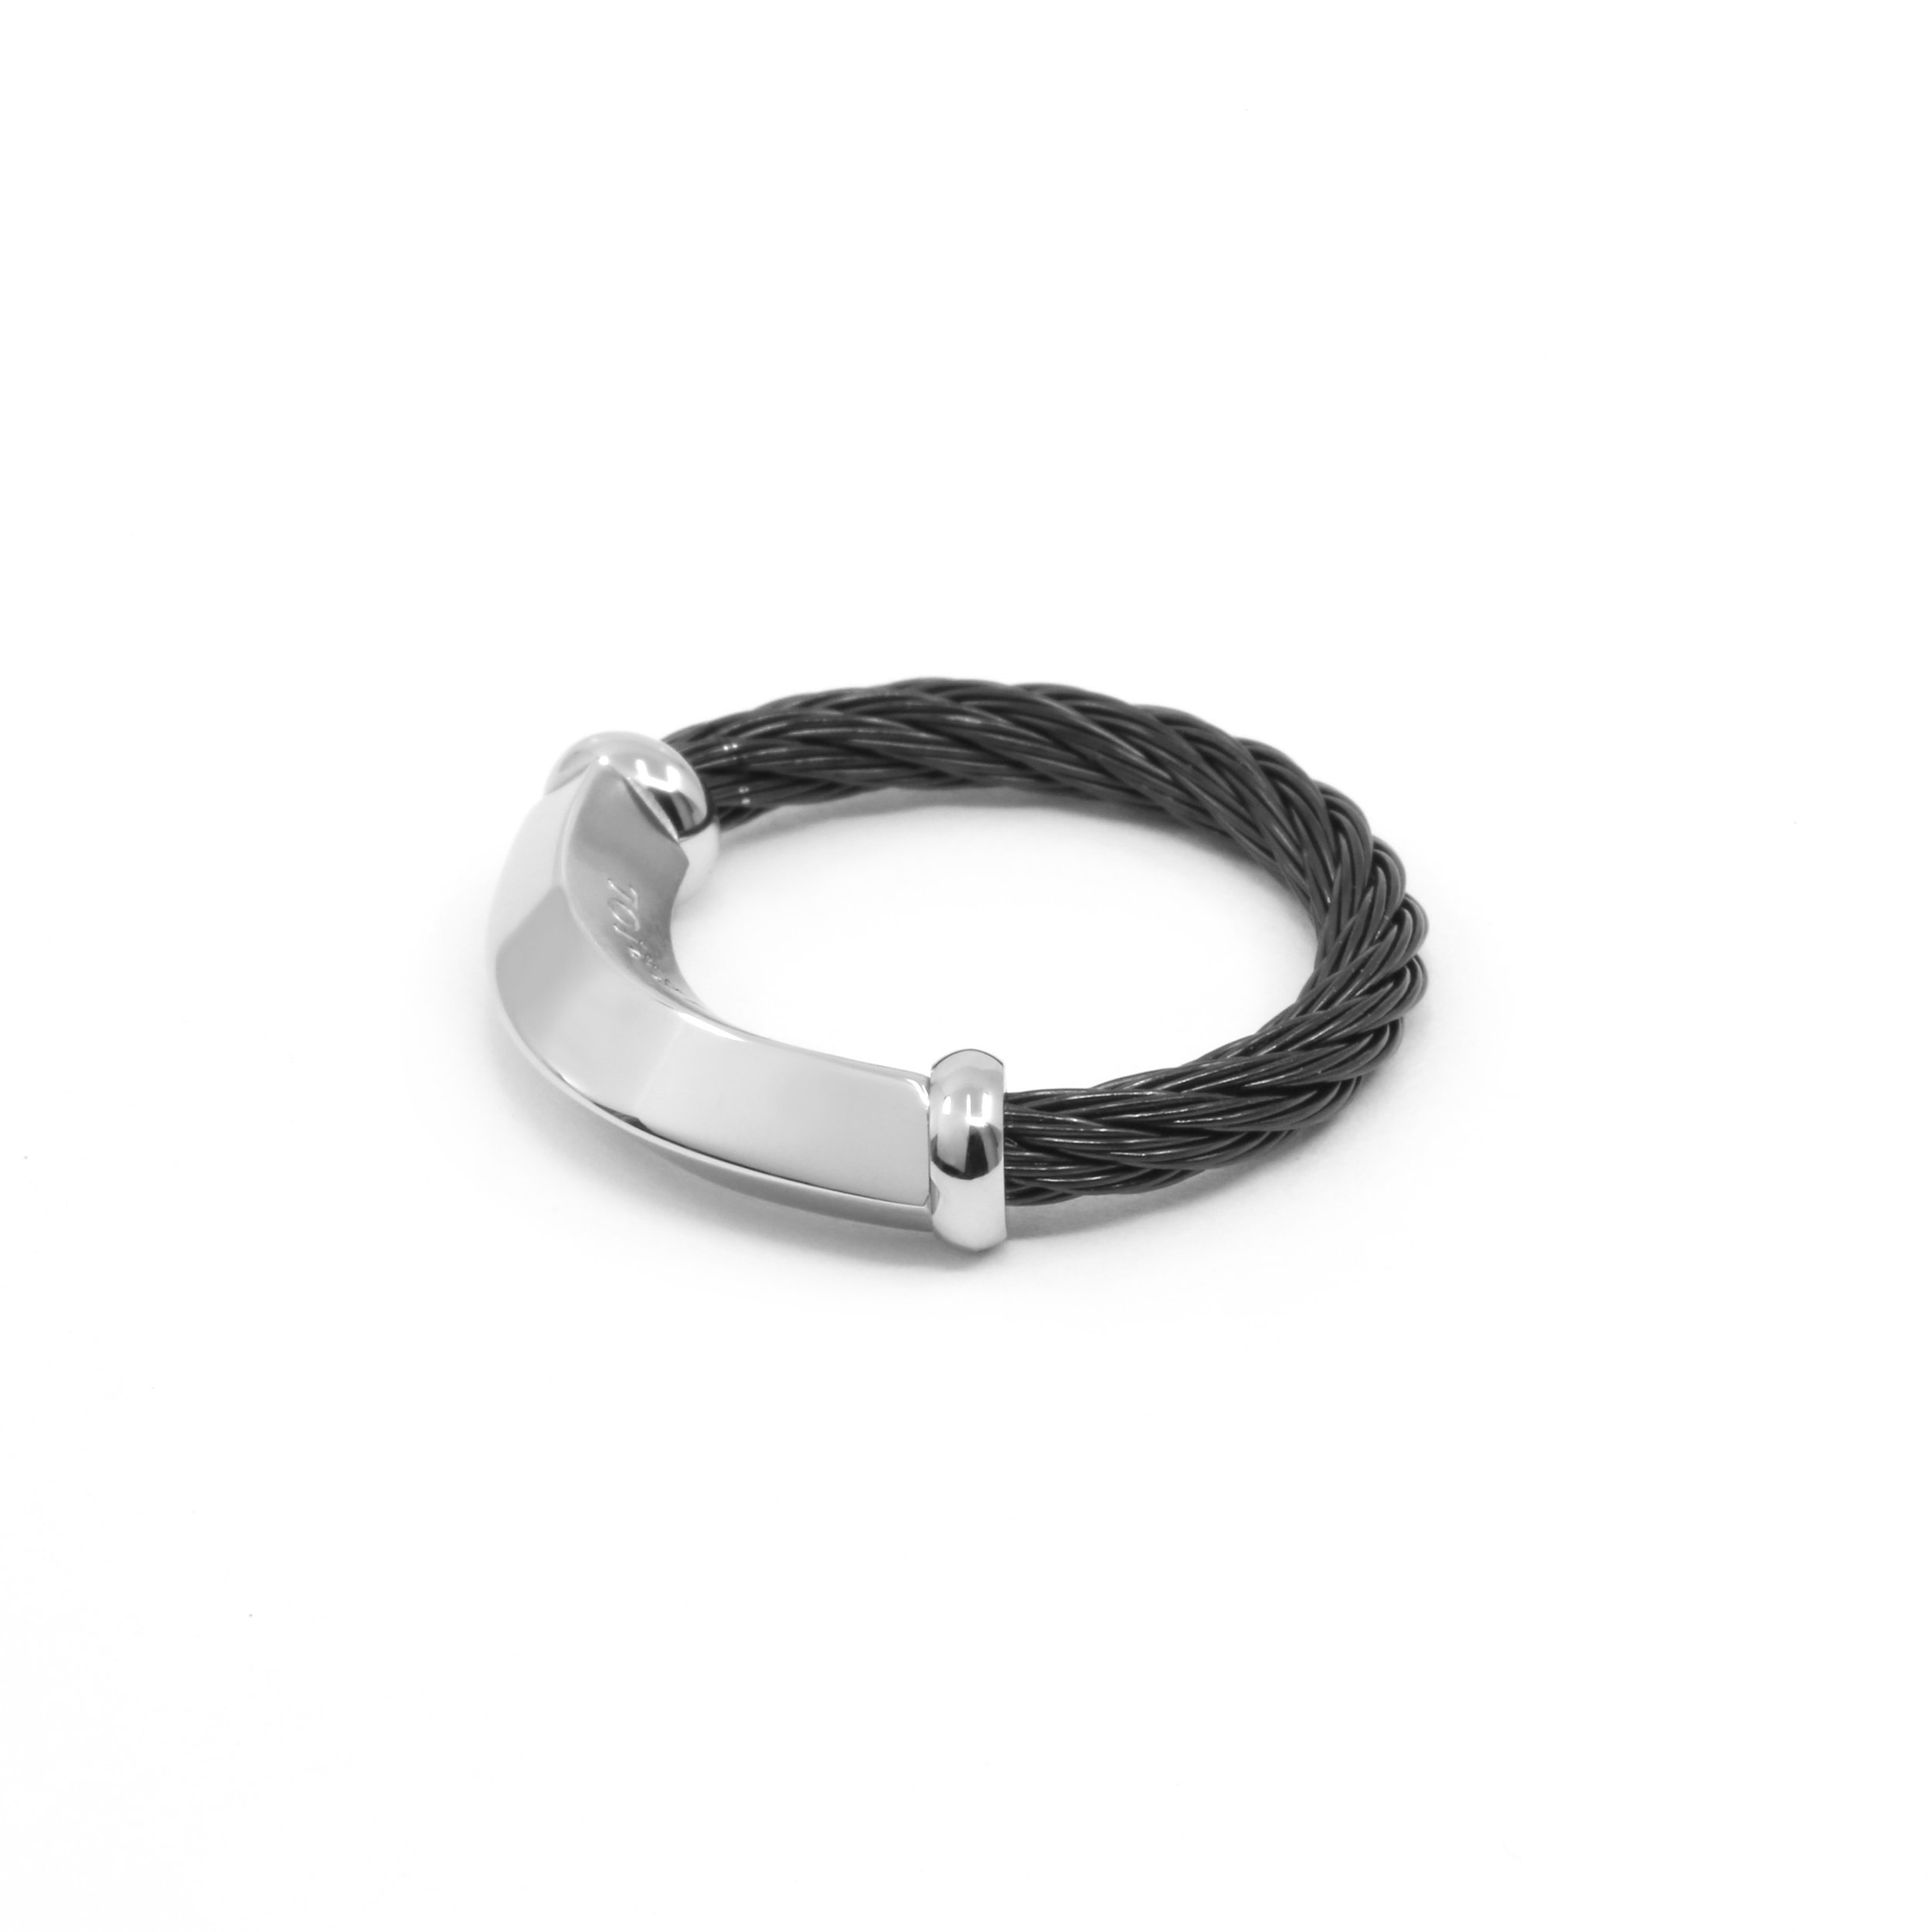 Better Half Ring - Stainless Steel Decor, Black PVD Cable.jpg